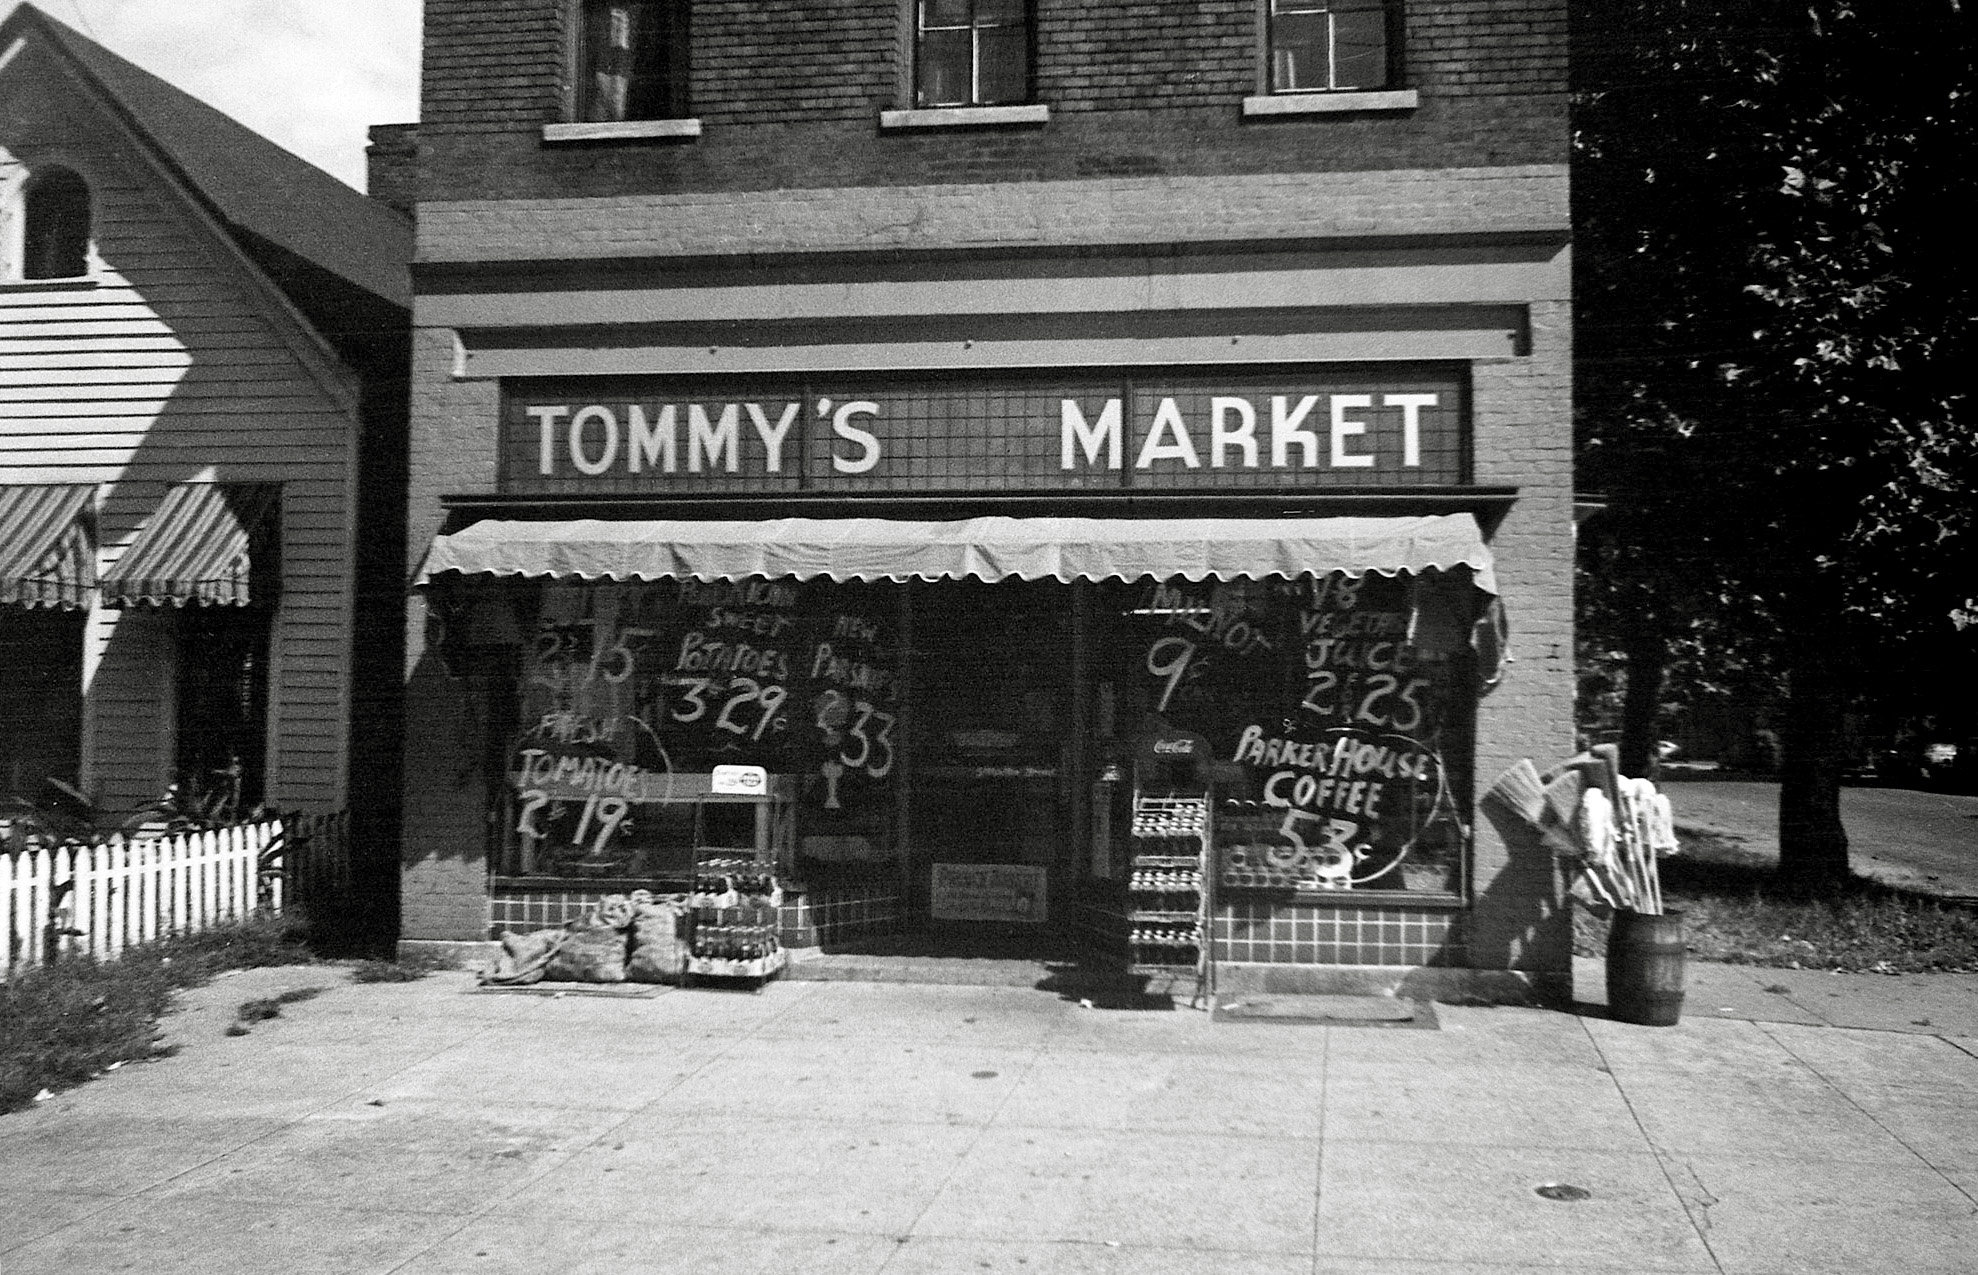 Tommy's Market in Evansville, Indiana. Location is likely near Third Avenue, and the date the late 1940s. Found in old photos from my grandfather. View full size.